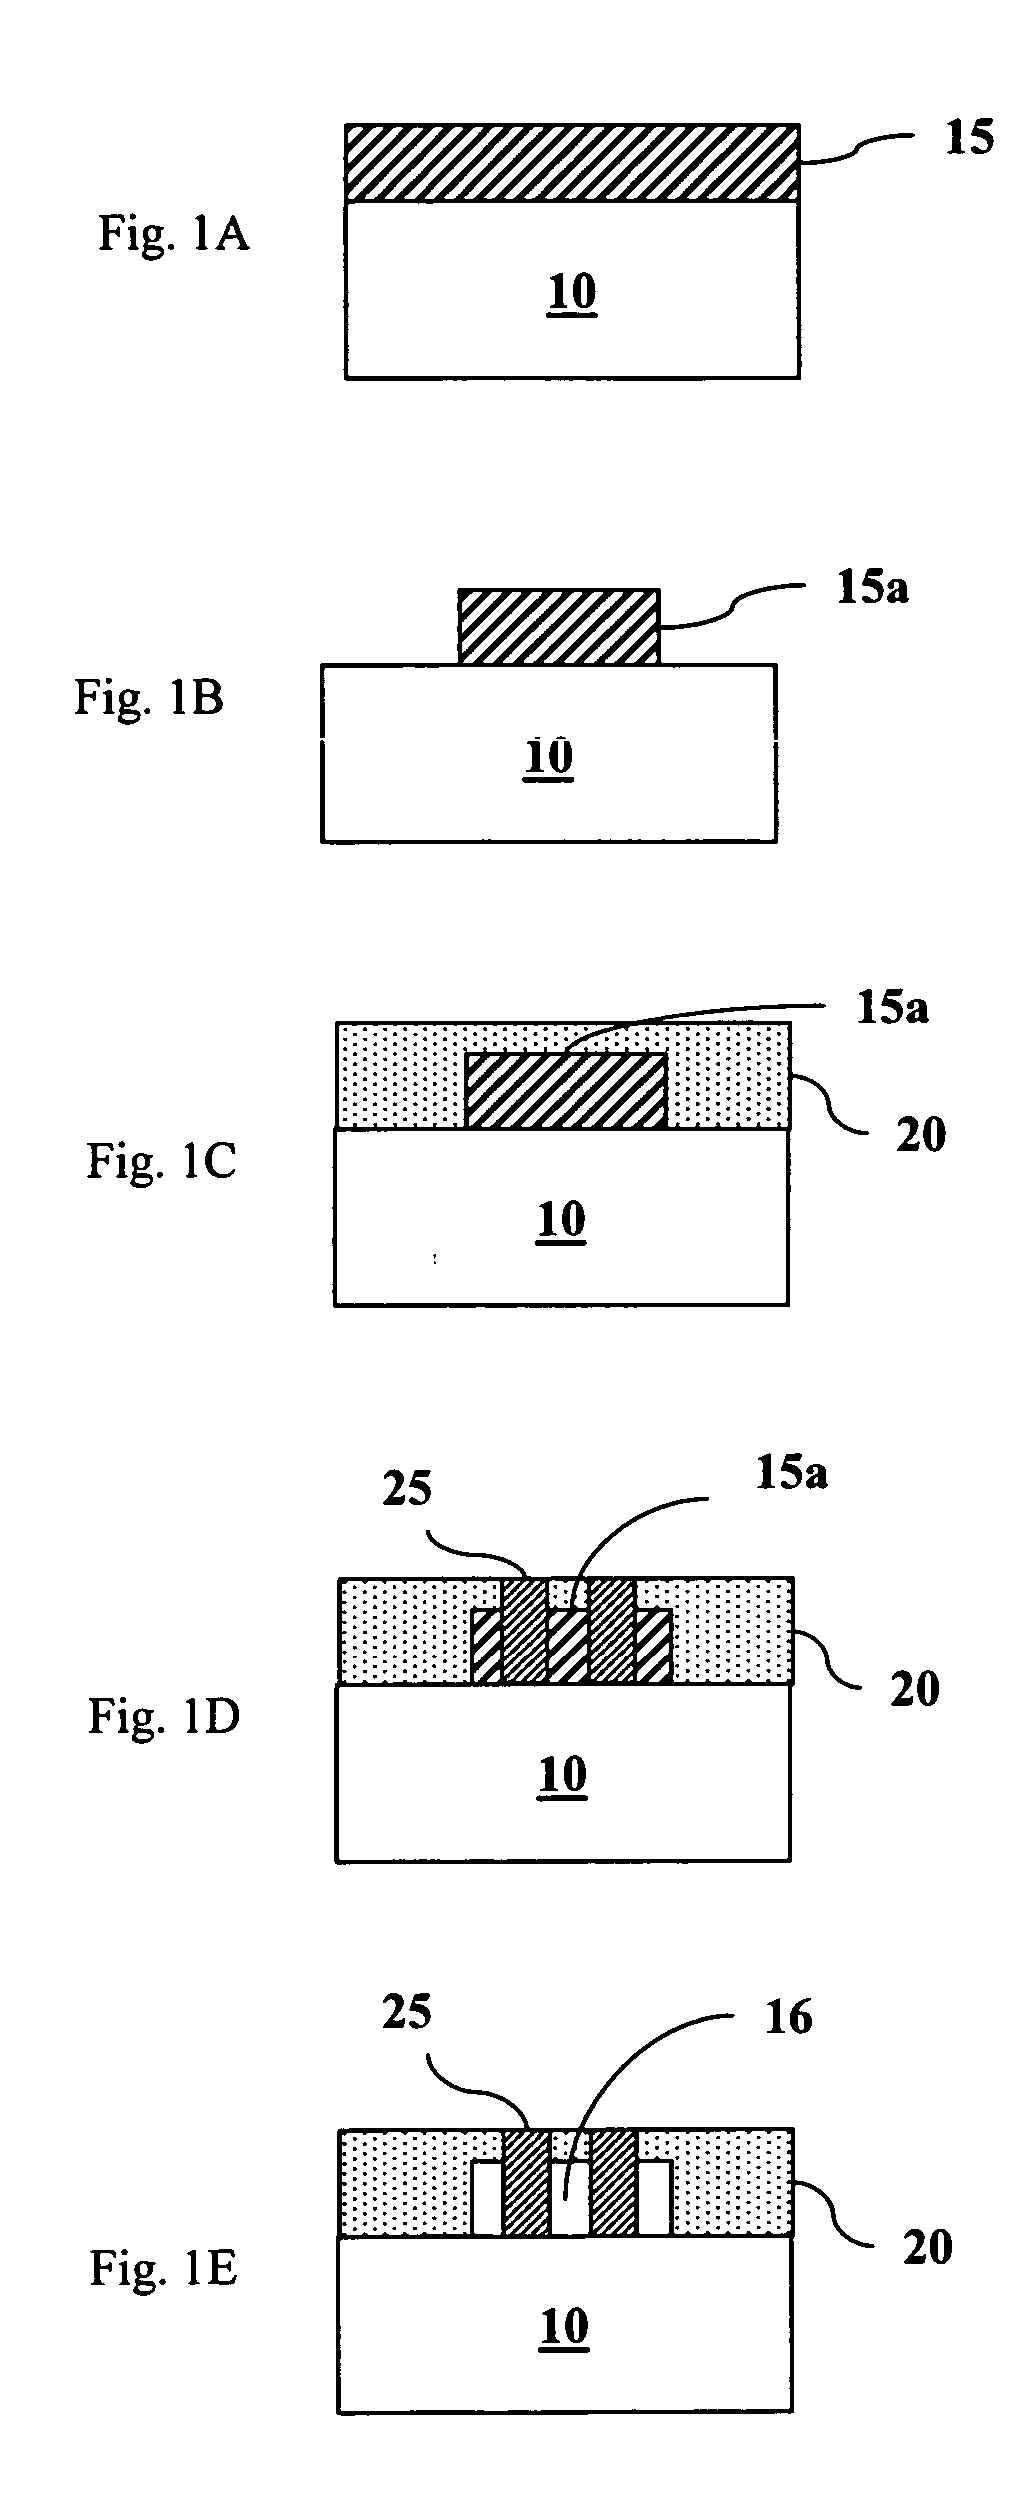 Electronic device manufacture